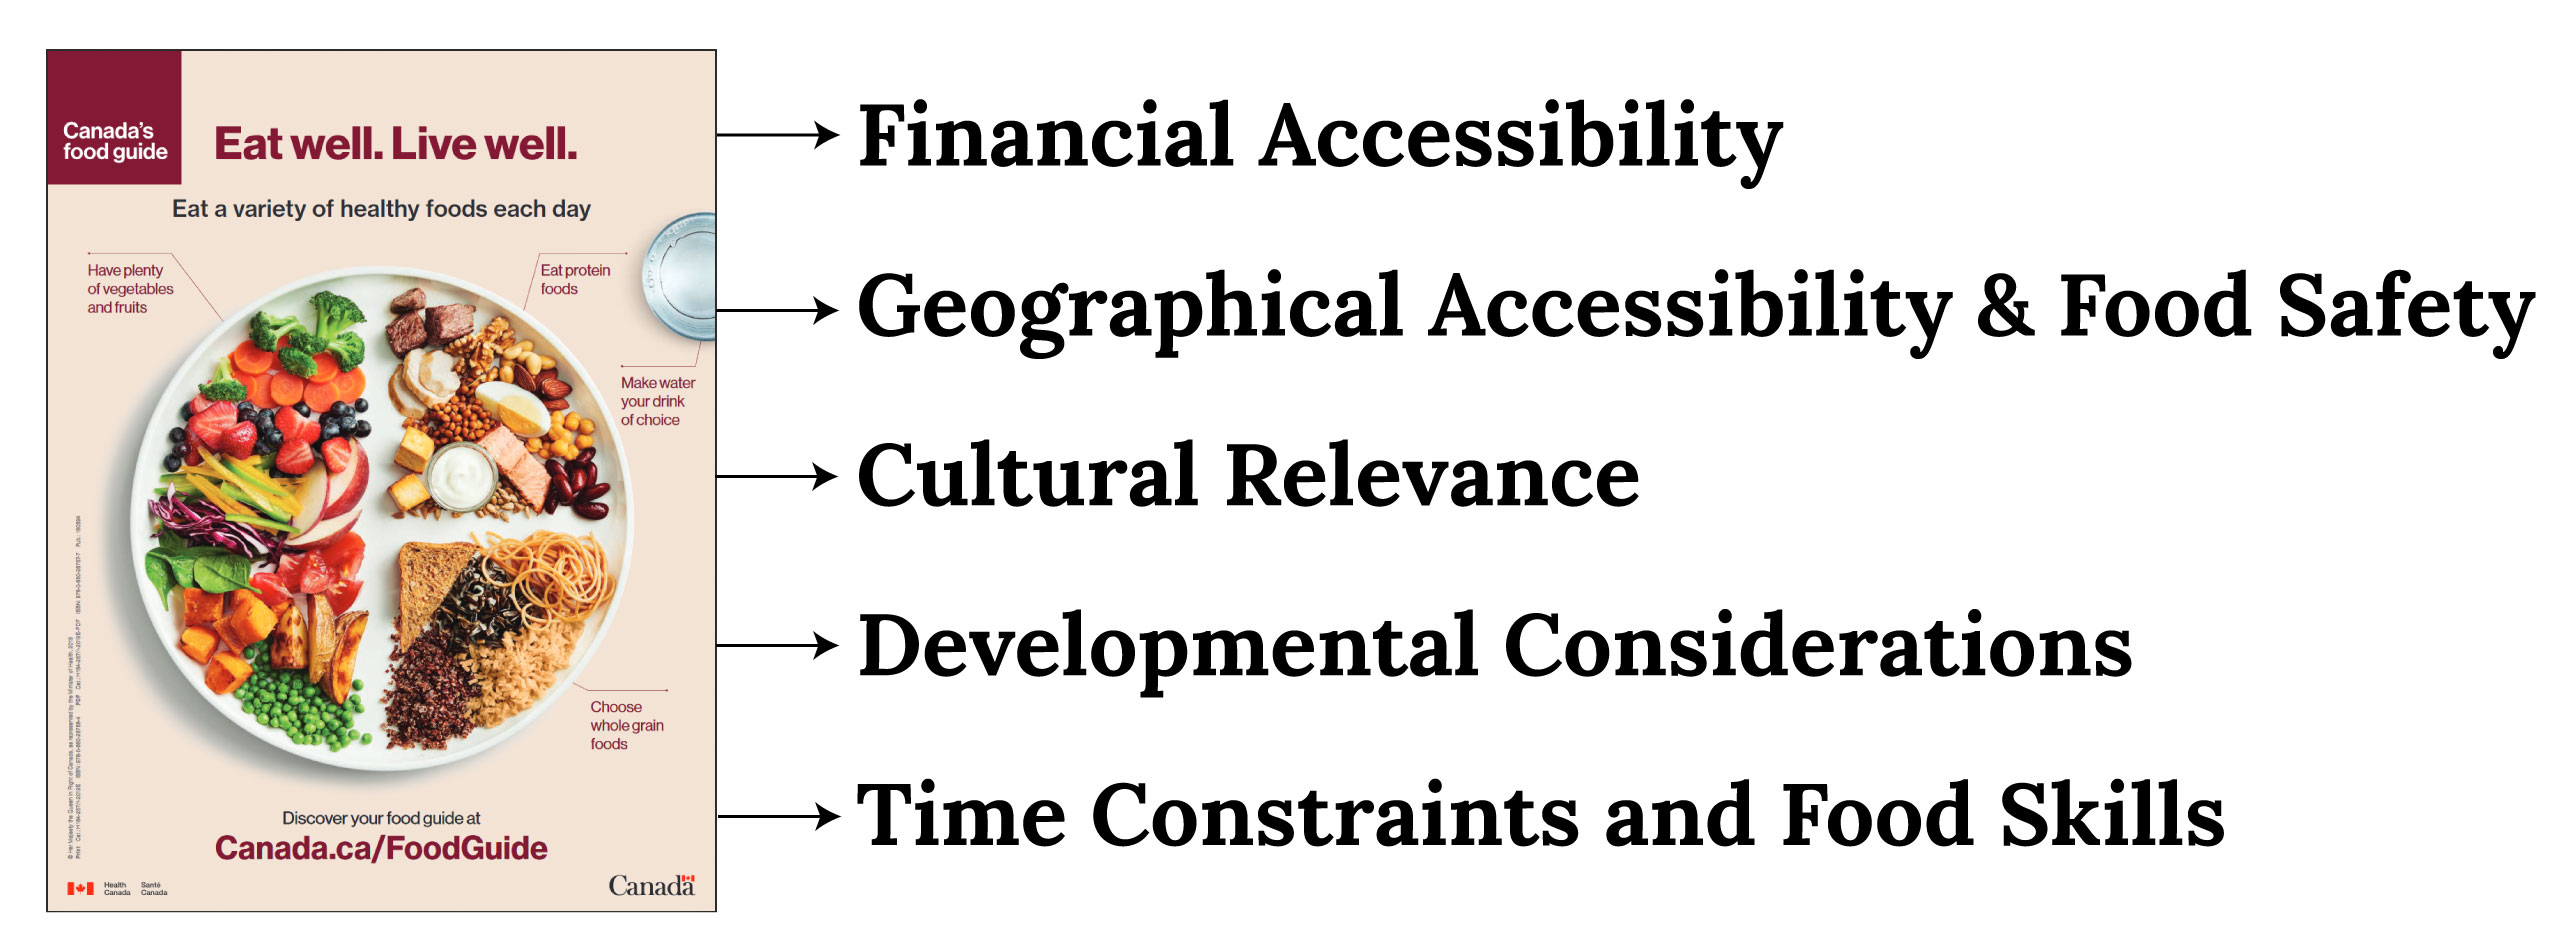 Common critiques emerging from the food guide, including financial accessibility, geographical accessibility and food safety, cultural relevance, developmental considerations, and time constraints and food skills